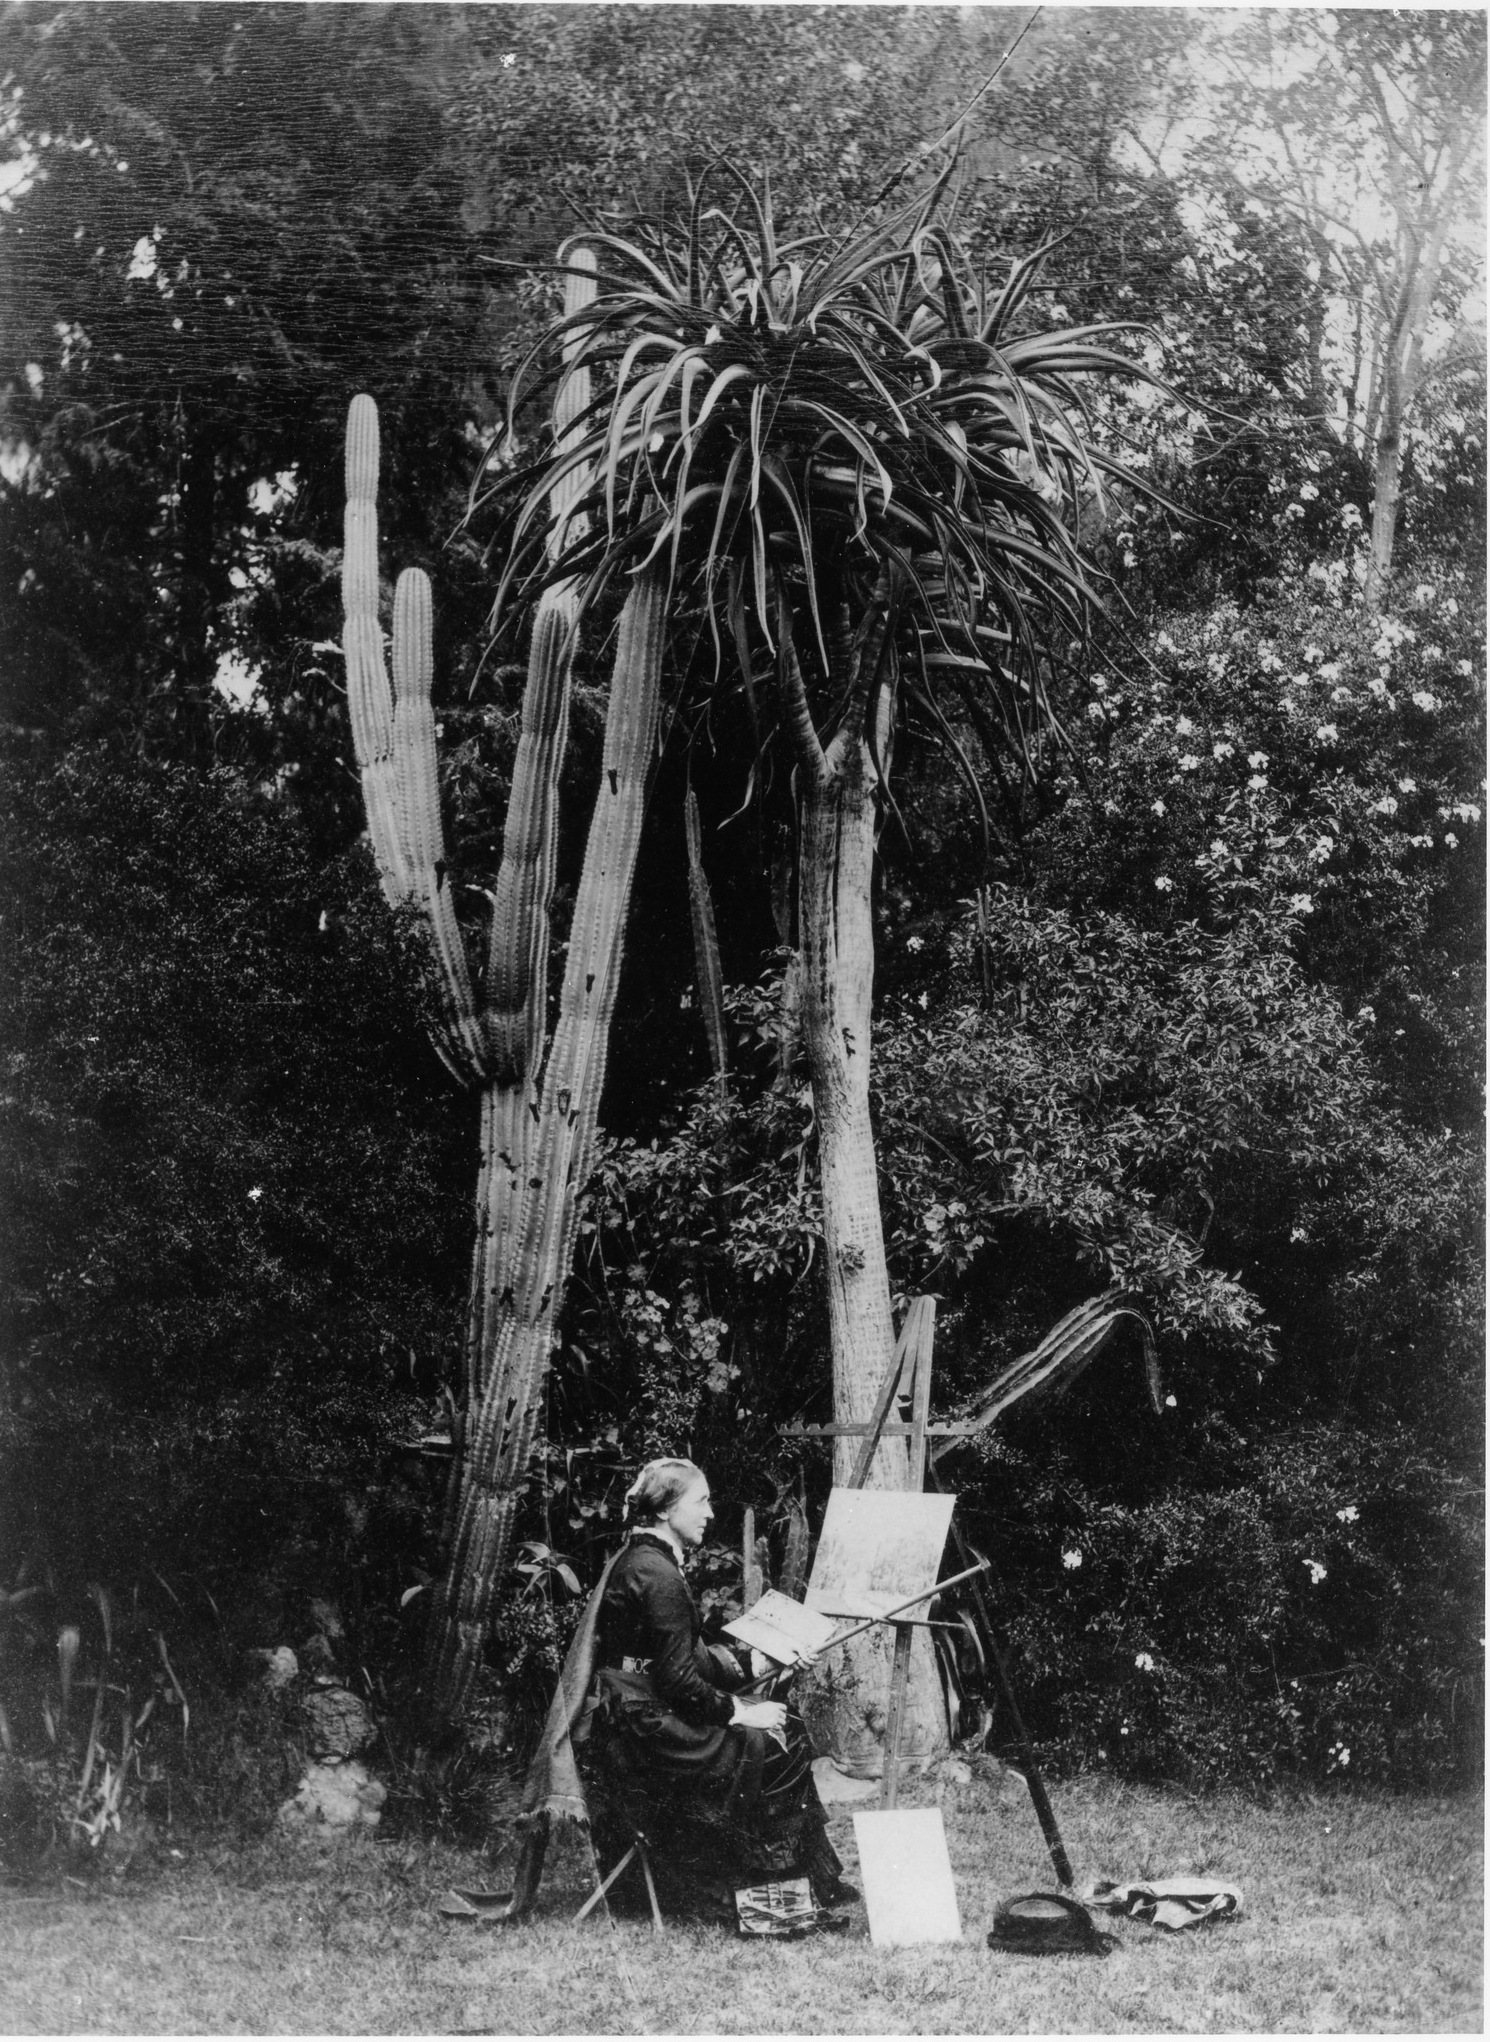 Marianne North at her easel in Grahamstown, South Africa circa 1883